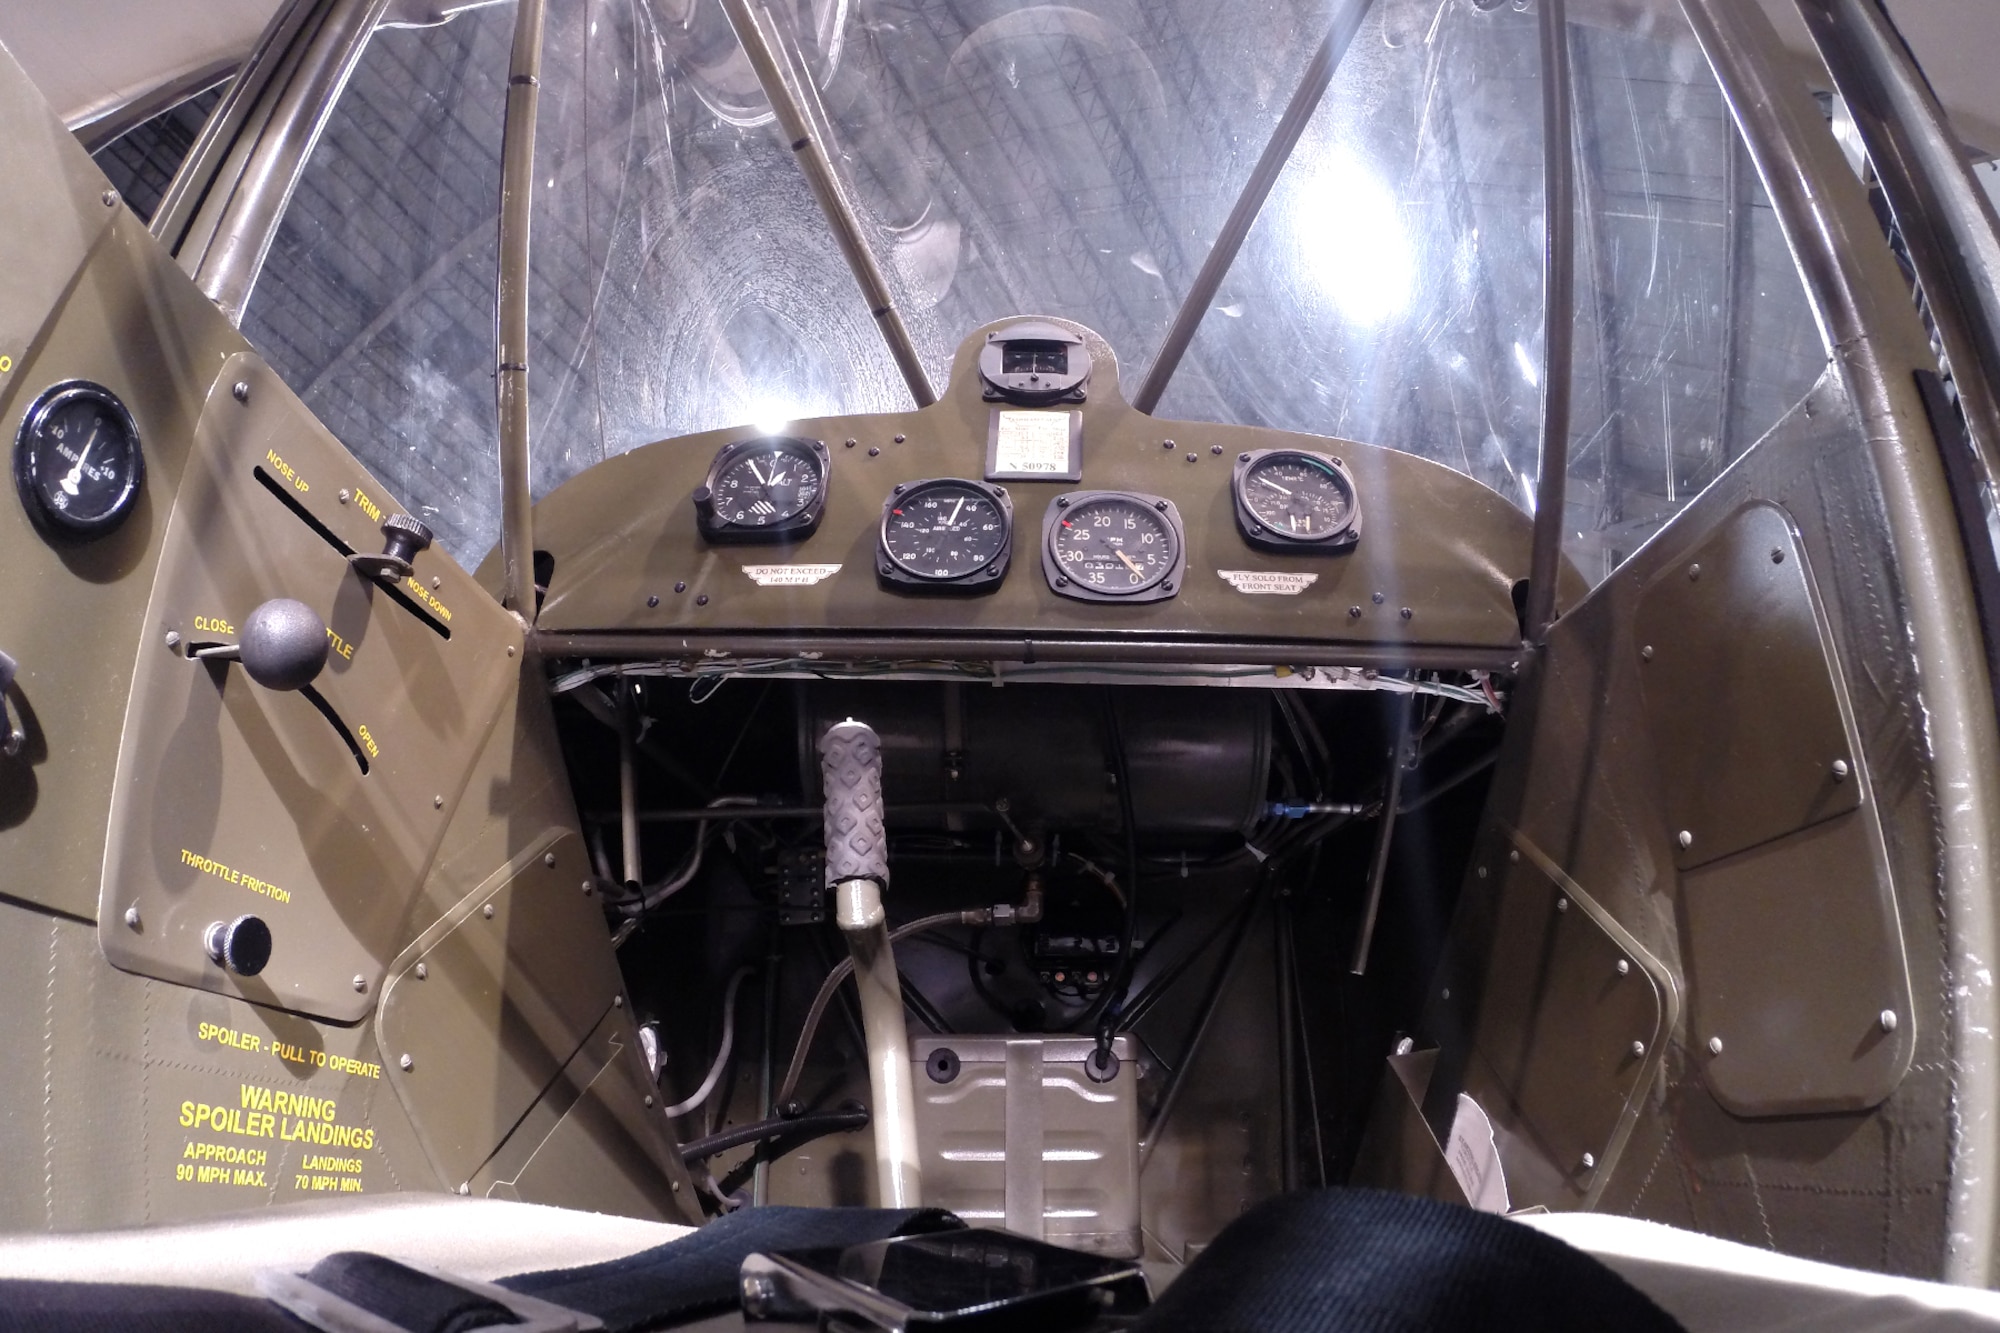 DAYTON, Ohio -- The cockpit of a Taylorcraft L-2M "Grasshopper" in the World War II Gallery at the National Museum of the United States Air Force. (U.S. Air Force photo)
